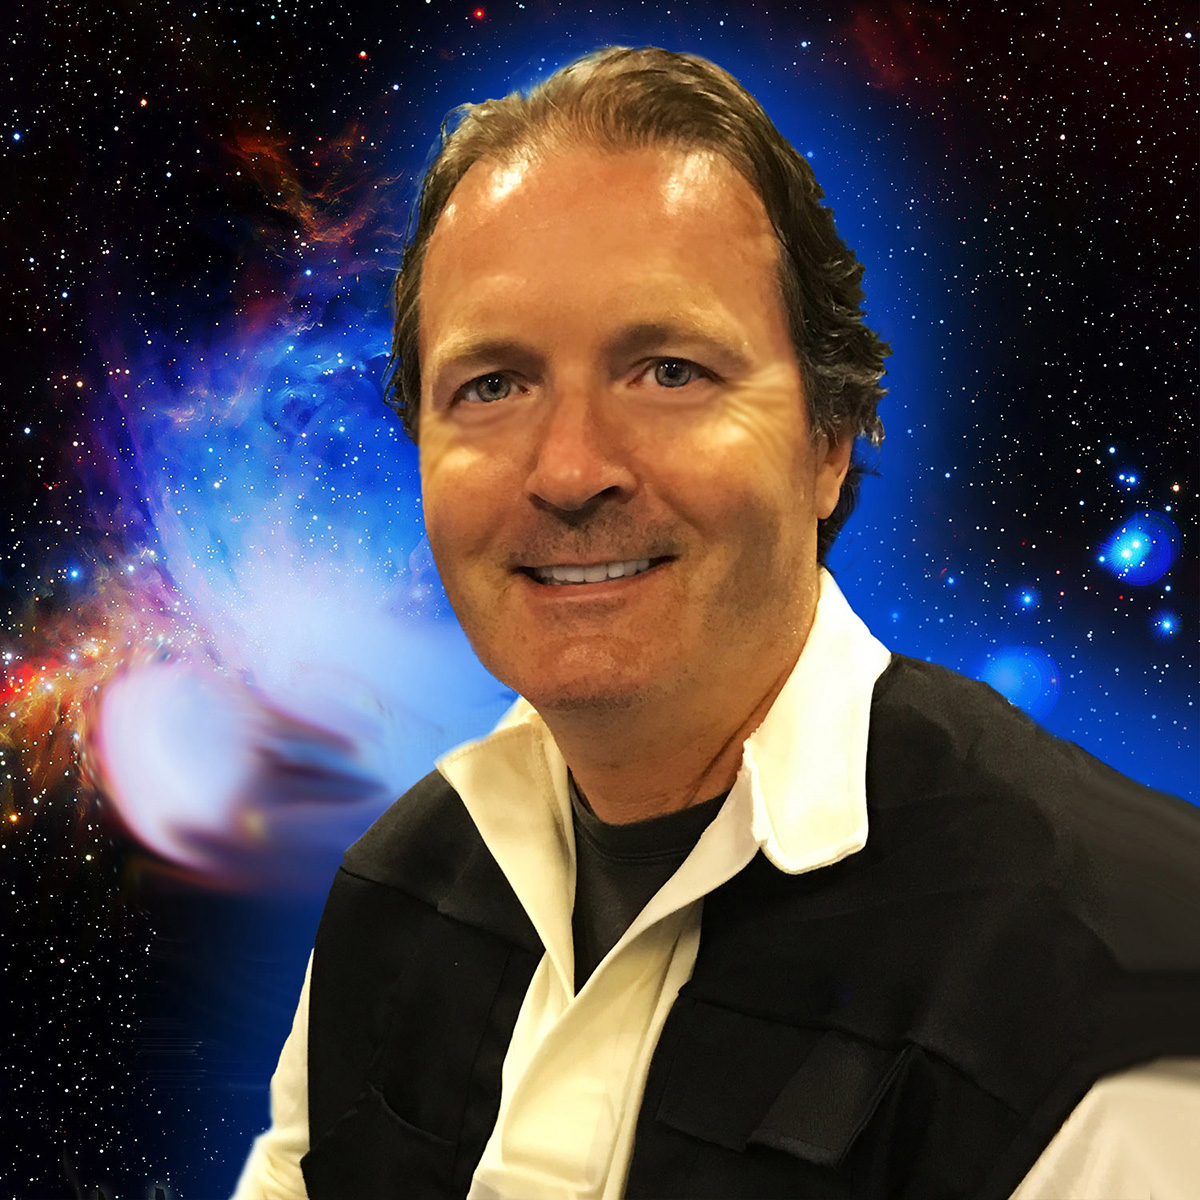 Show #137: May 15, 2010 - 'Native Americans and UFOs' with Robert Stanley